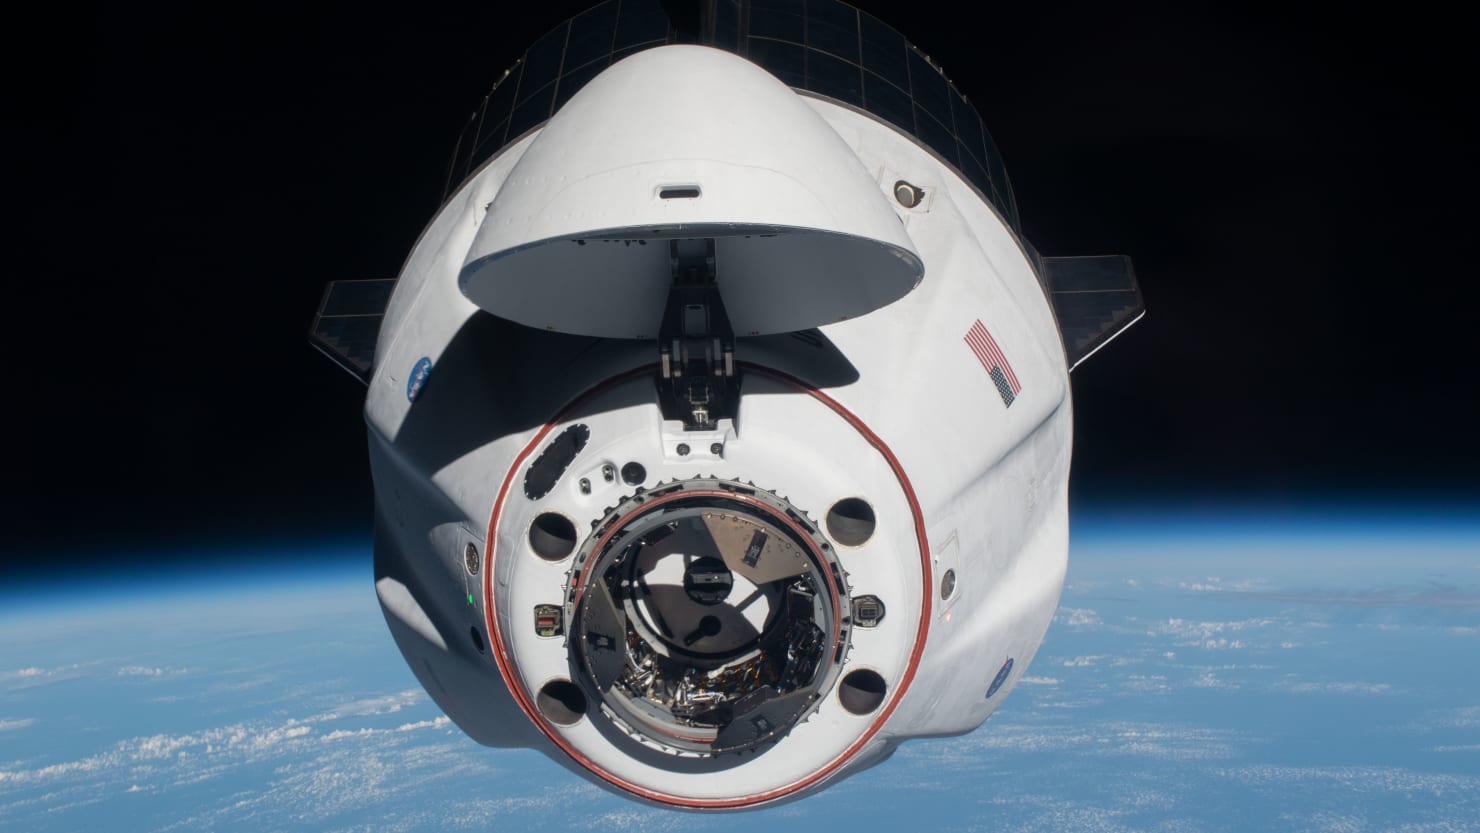 NASA is considering using SpaceX to rescue astronauts after the Russian space station leak